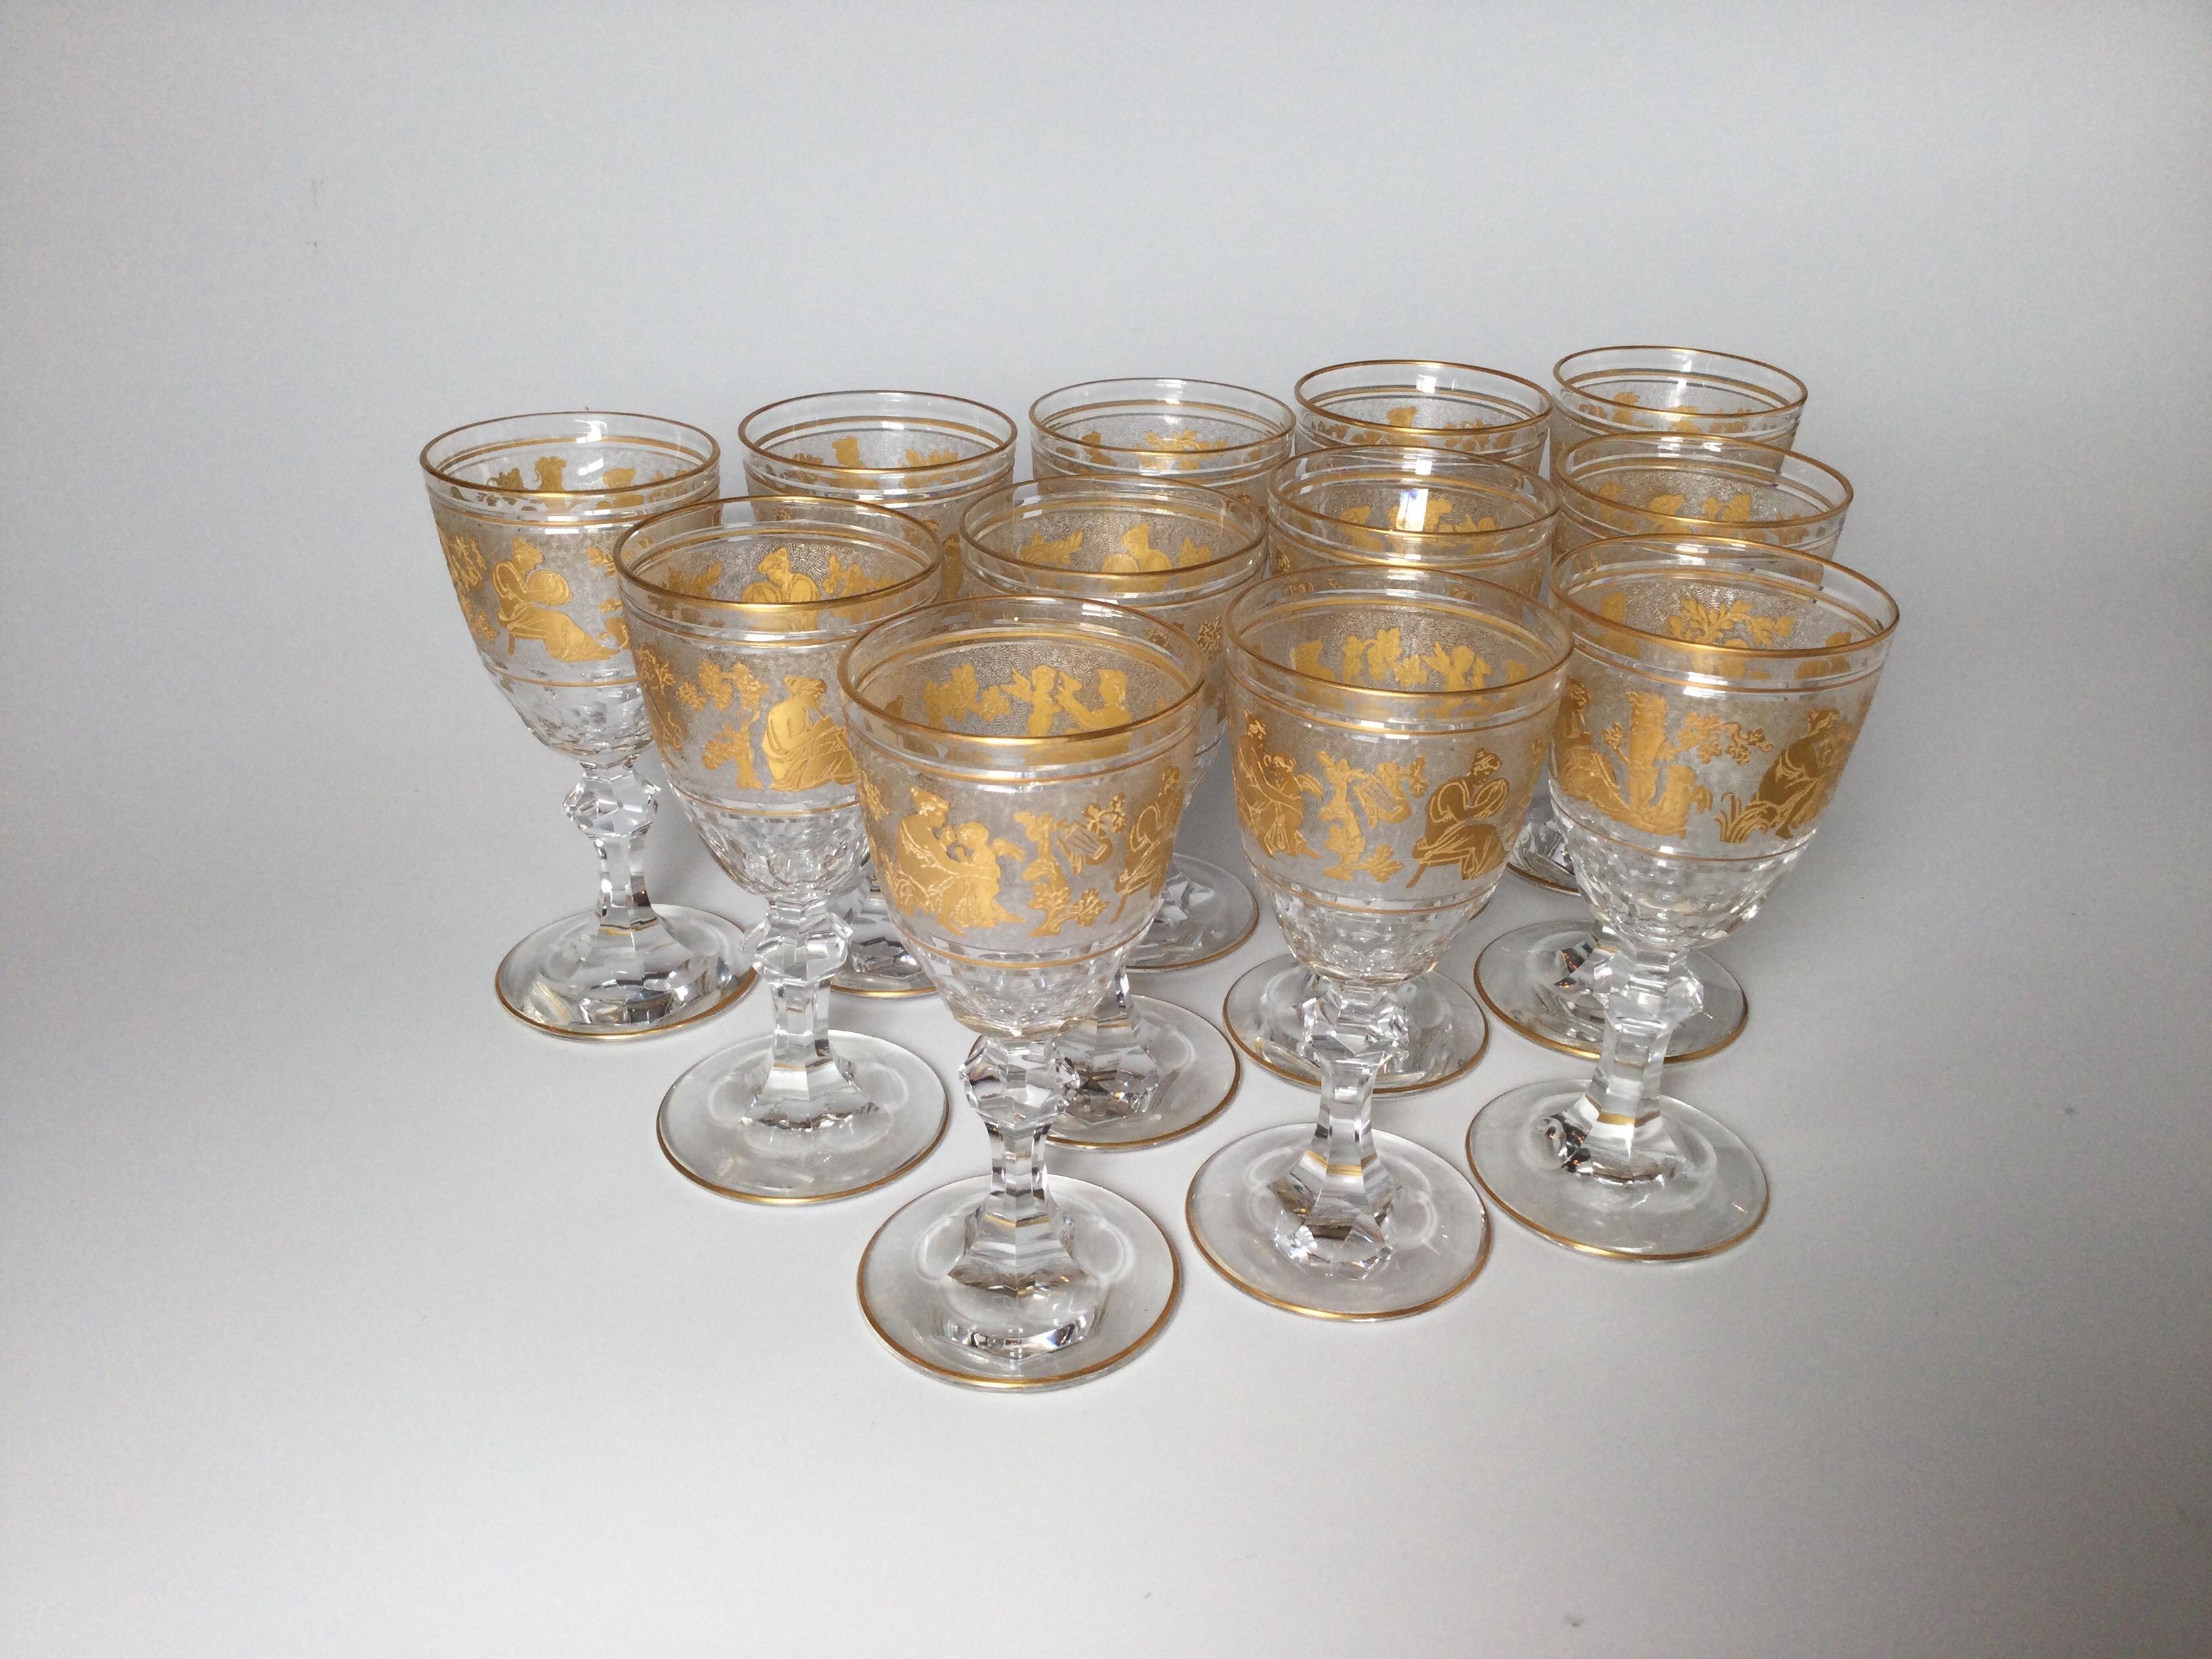 Neoclassical Set of 12 Val St. Lambert Acid Etched and Gilt Short Wine or Port Stems